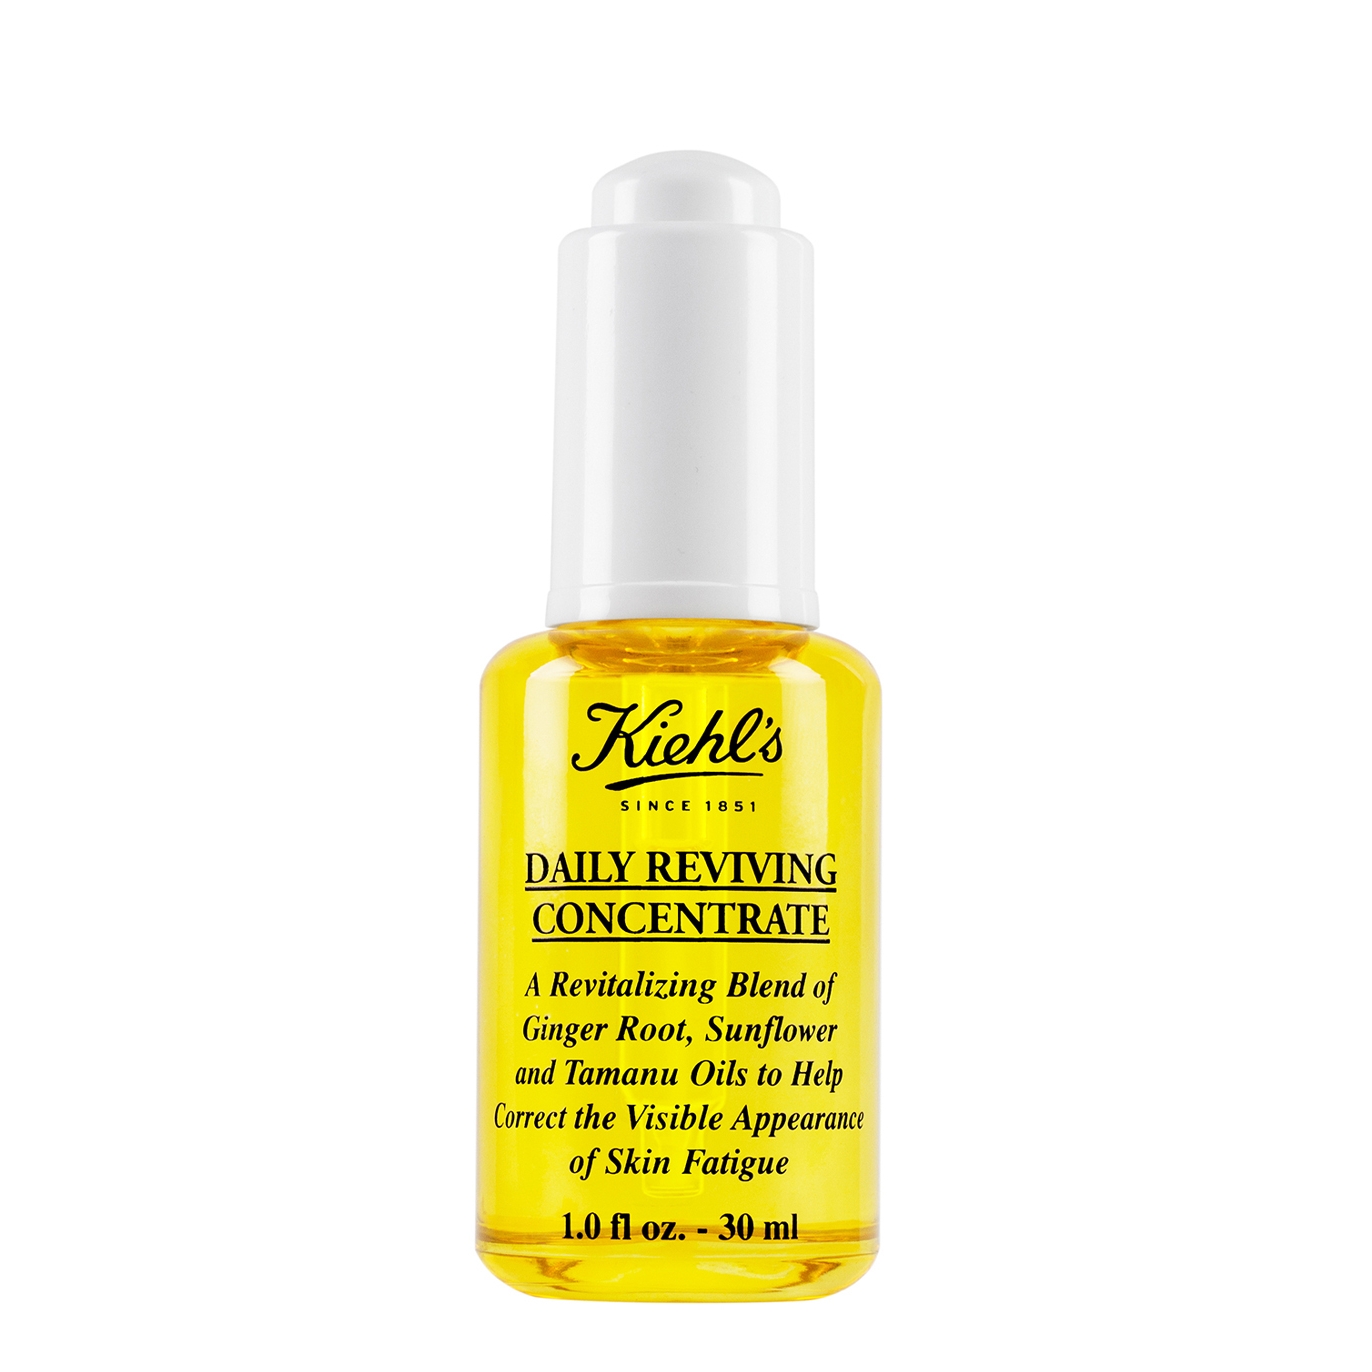 Daily Reviving Concentrate 30ml, Lotions, Antioxidant Protect